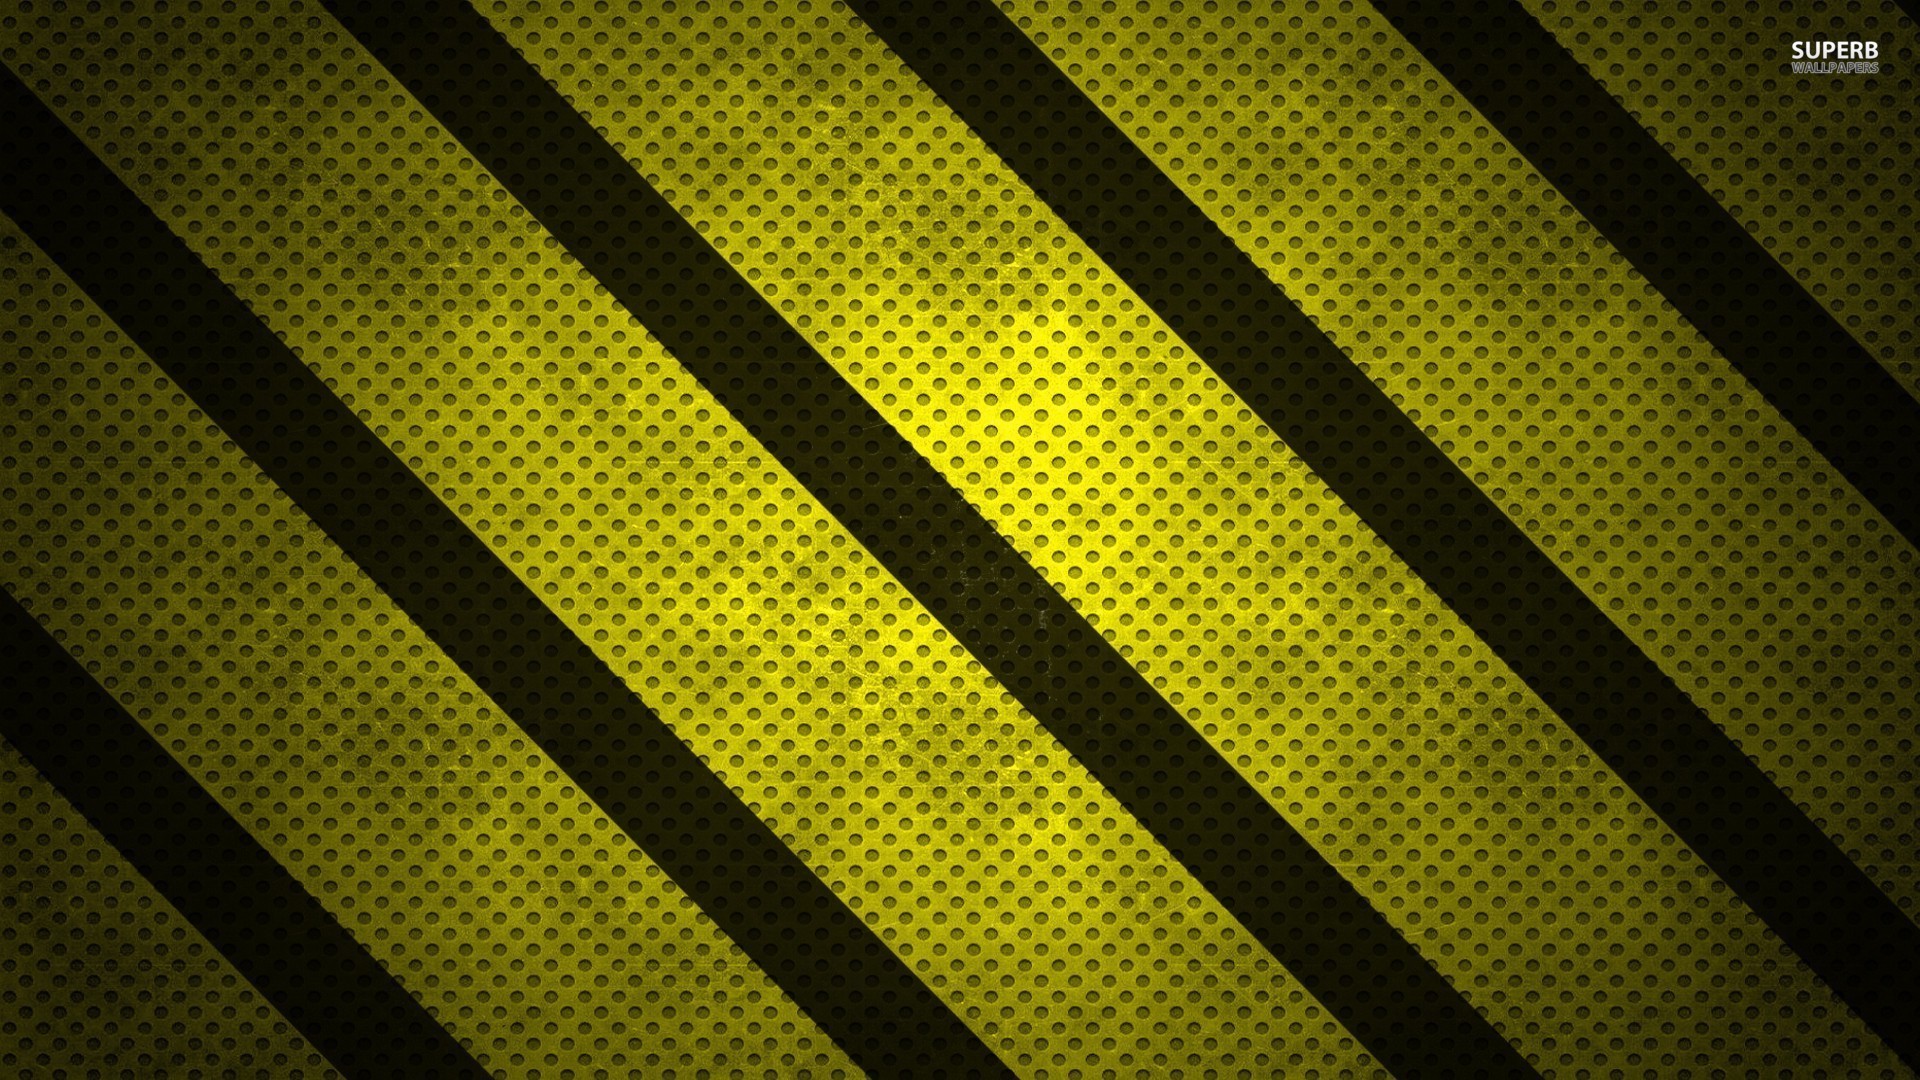 1920x1080 Black and Yellow Abstract Background HD Wallpaper 858 - Amazing .